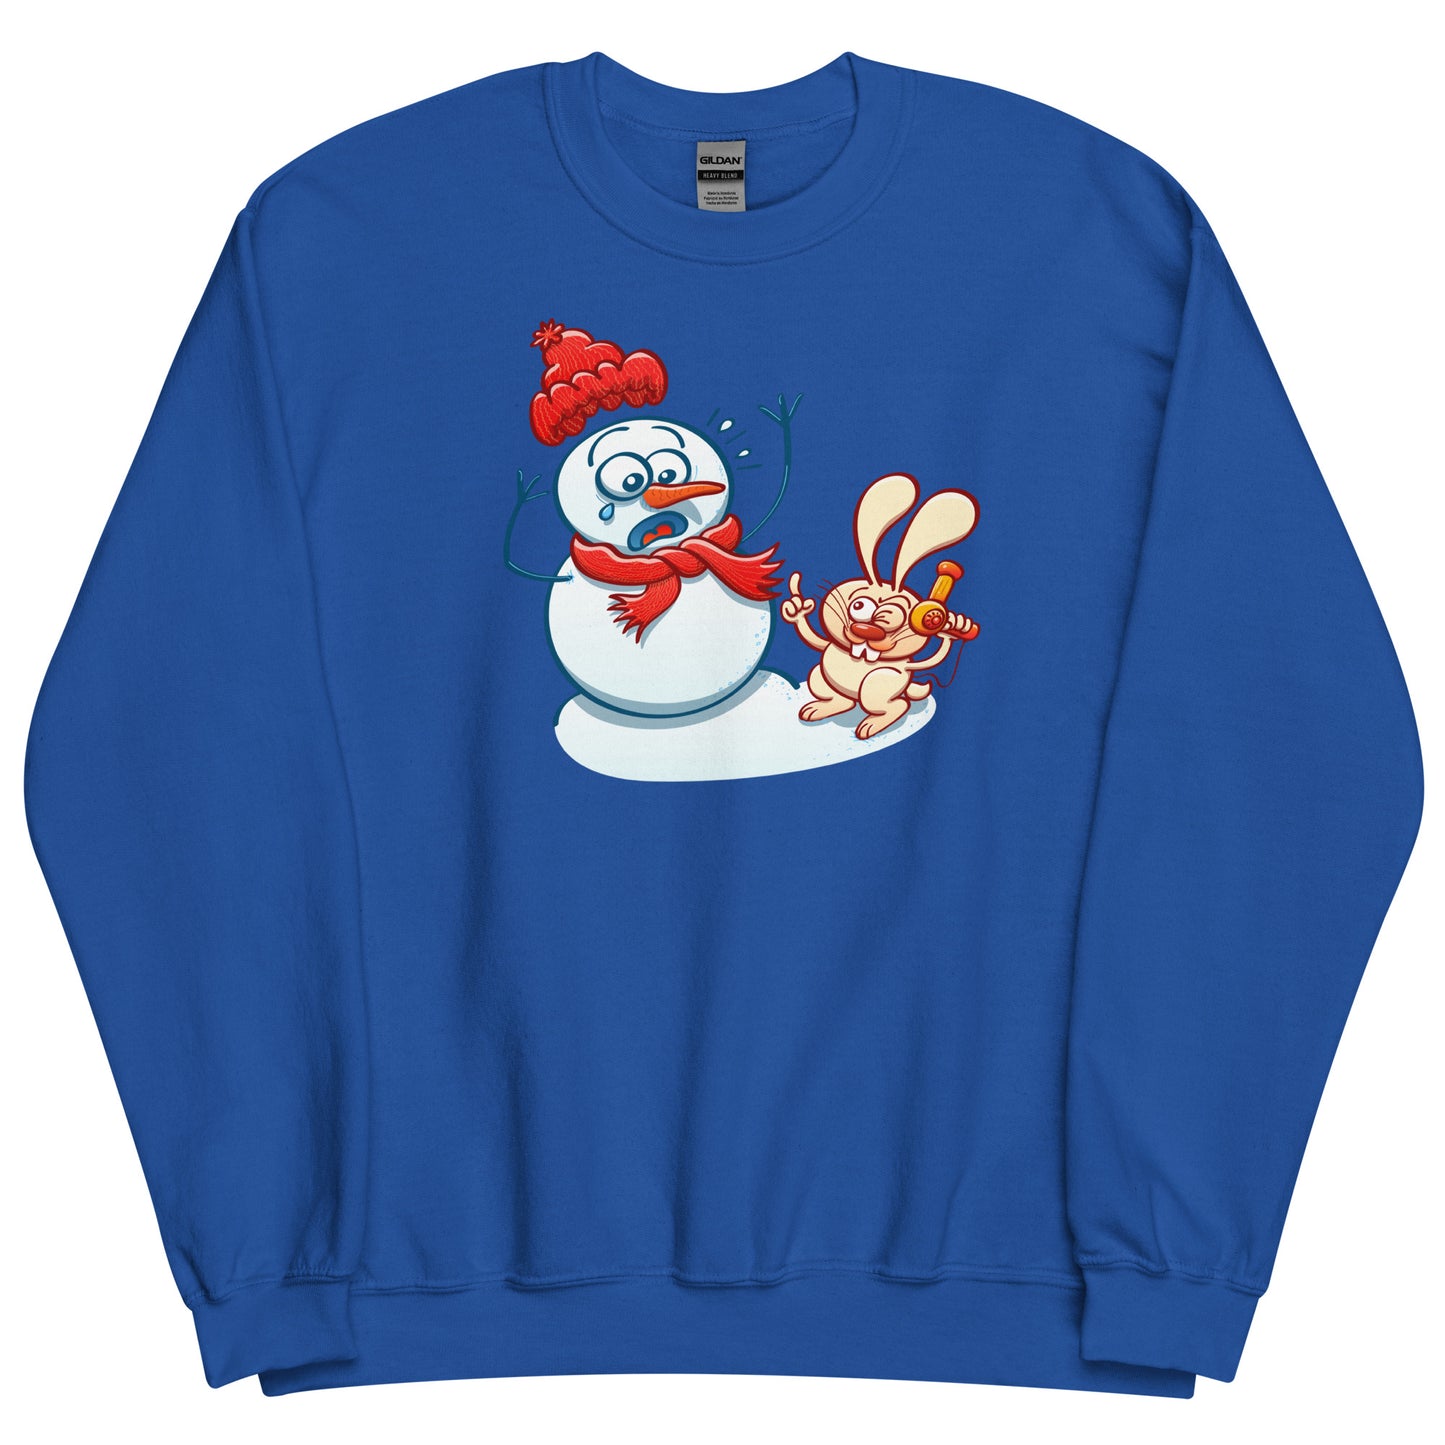 Bunny Stealing a Snowman's Nose with a Blow Dryer - Unisex Sweatshirt. Royal blue. Front view